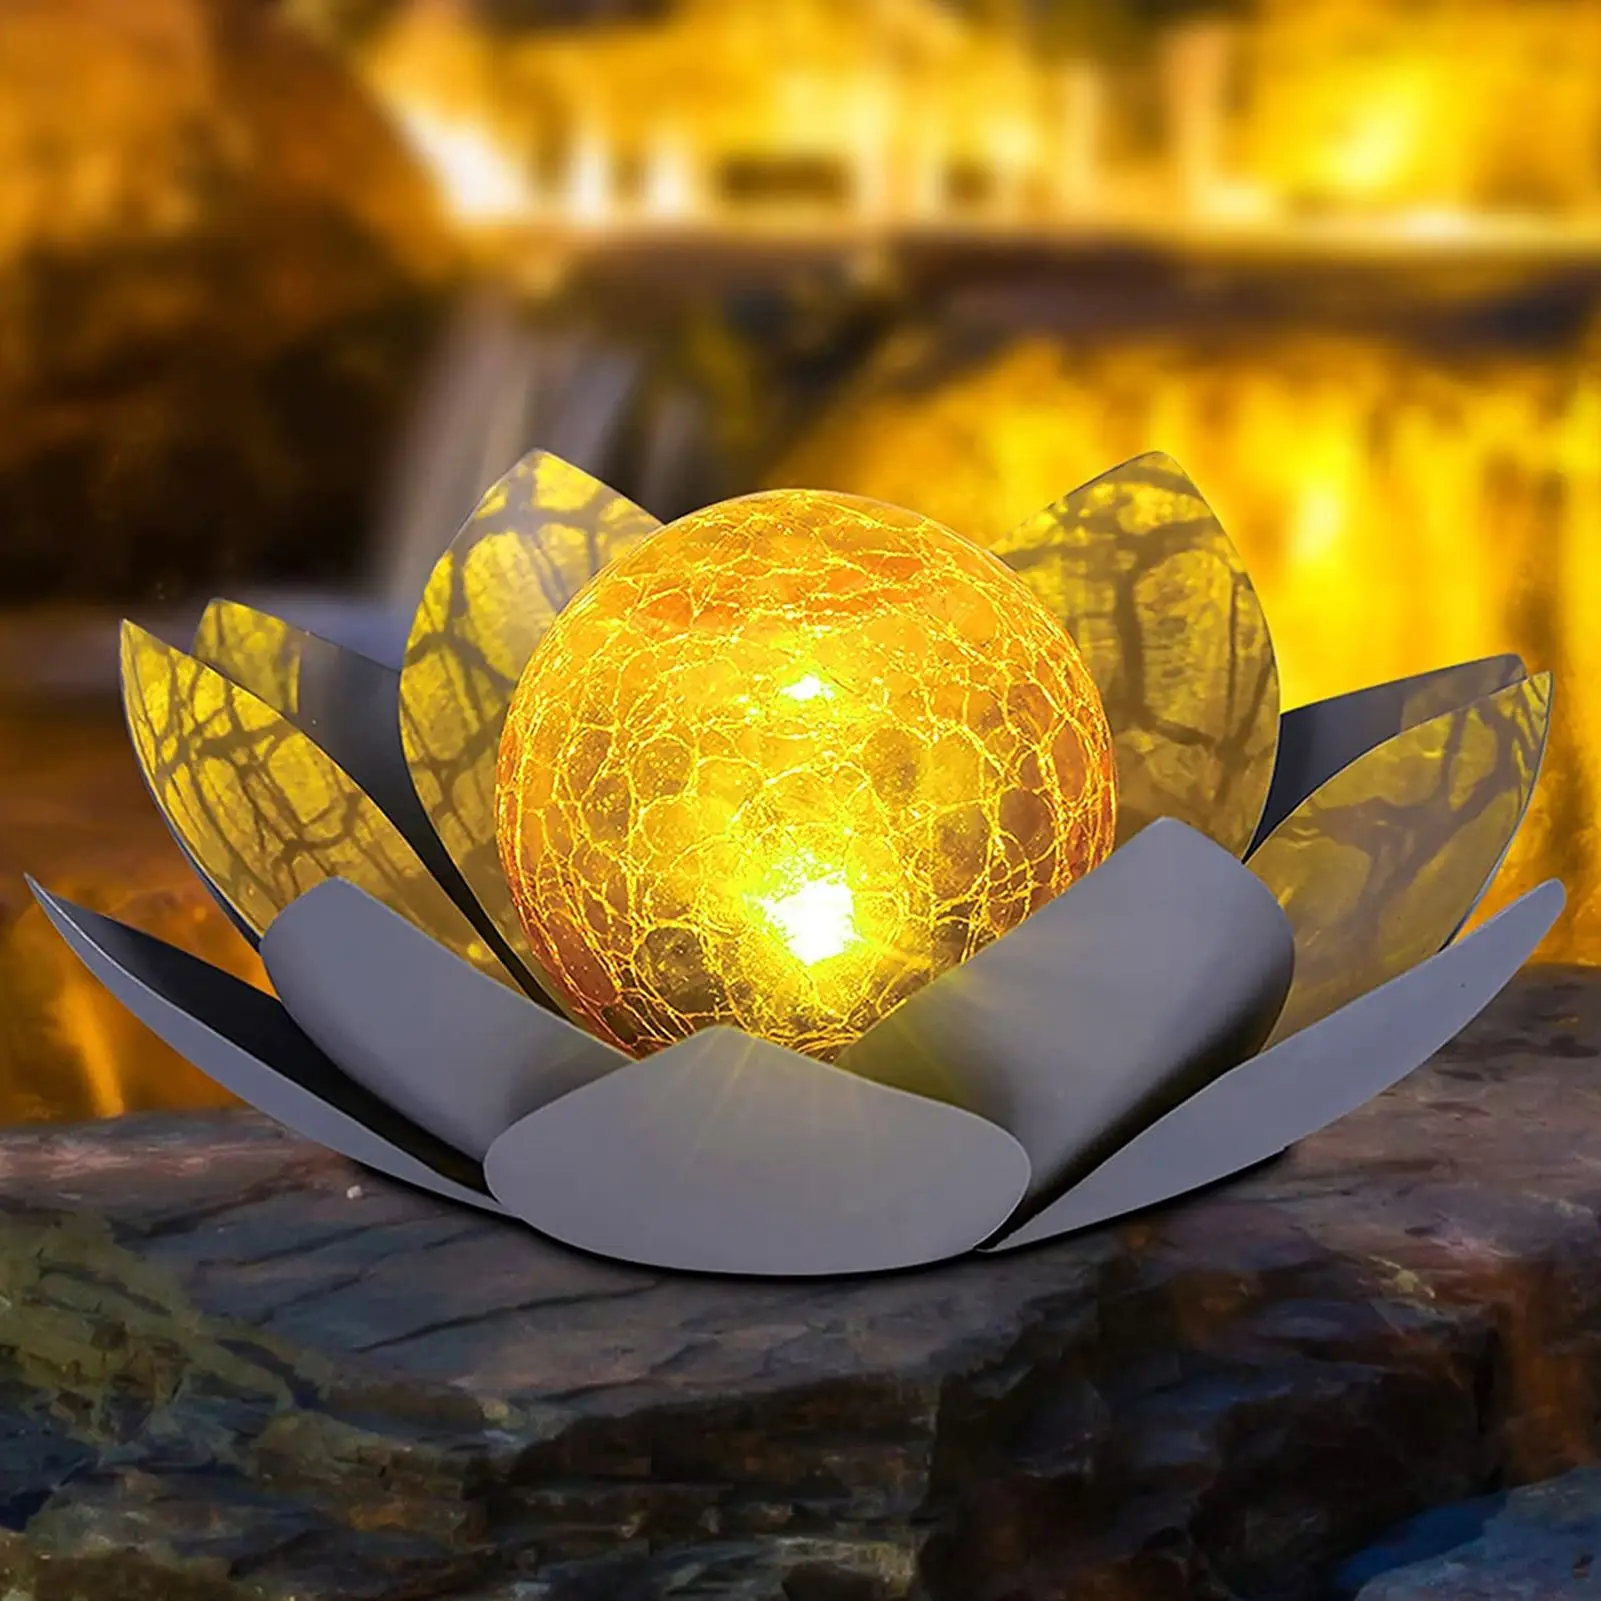 

Amber Crackle Glass Lotus Solar Light Waterproof Metal Flower LED Light Garden Lamp Lawn Lamp For Patio Pathway Lawn Decoration